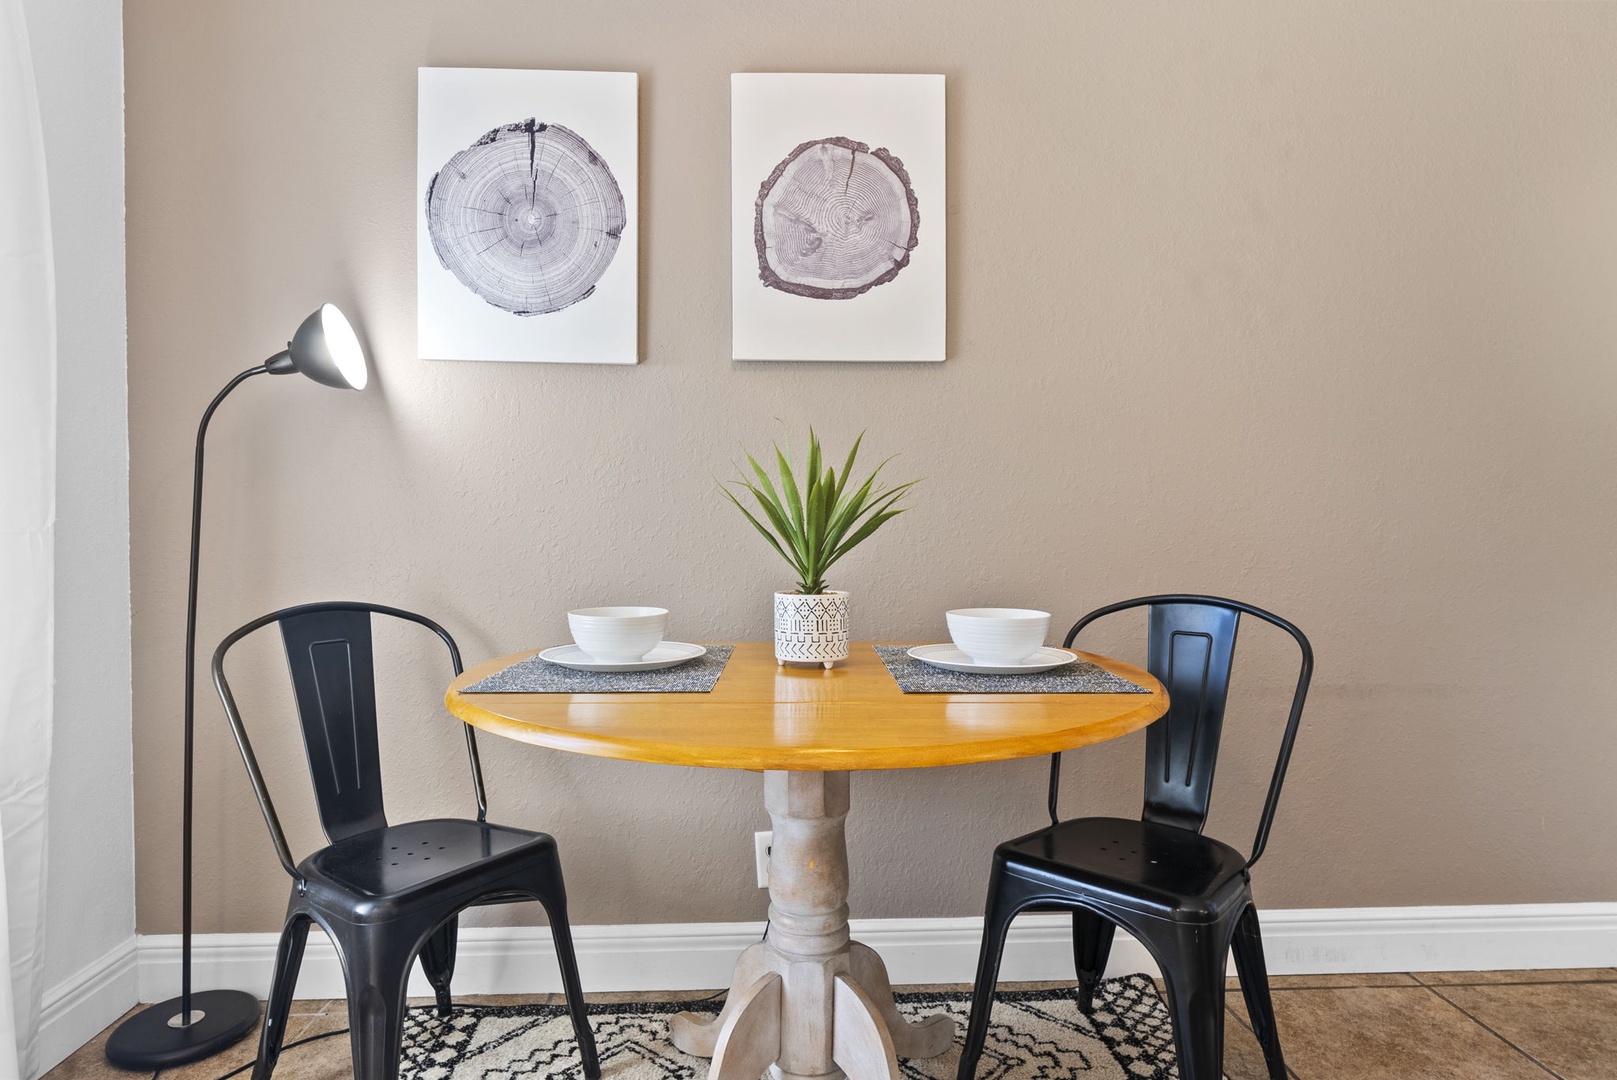 Sip morning coffee or enjoy a bite at the dining table, with seating for 2